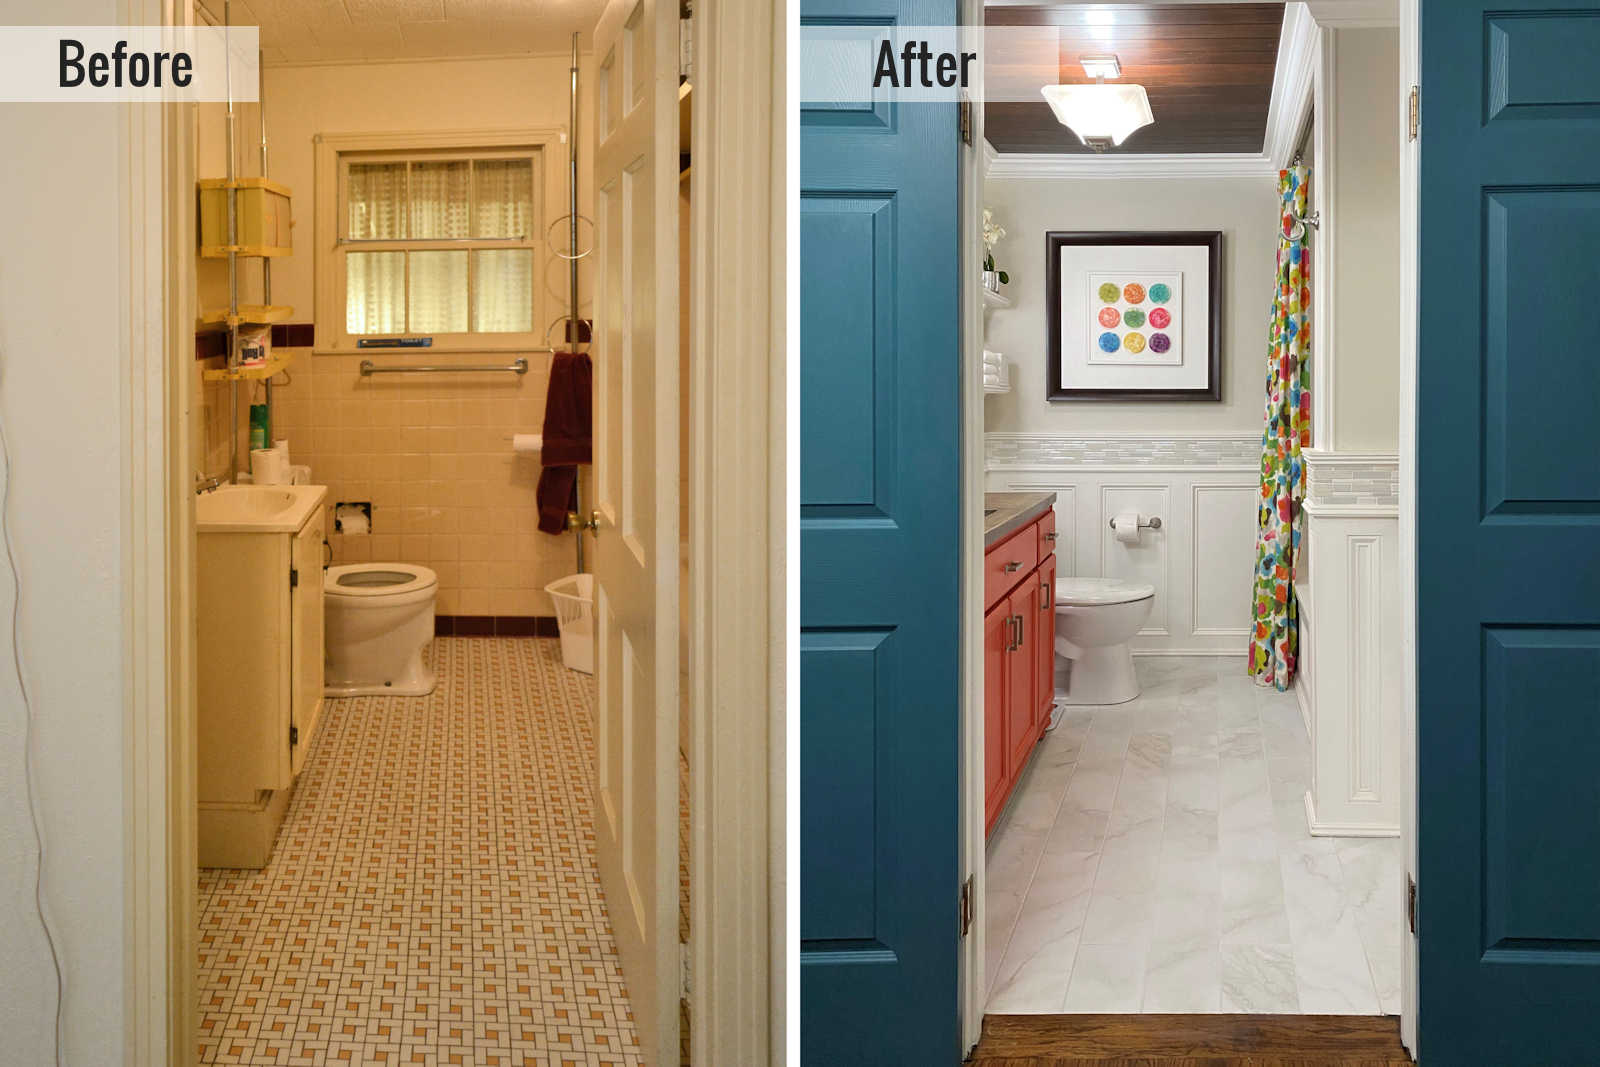 Bathroom remodel - before and after of a small but full hallway (guest) bathroom after a budget remodel